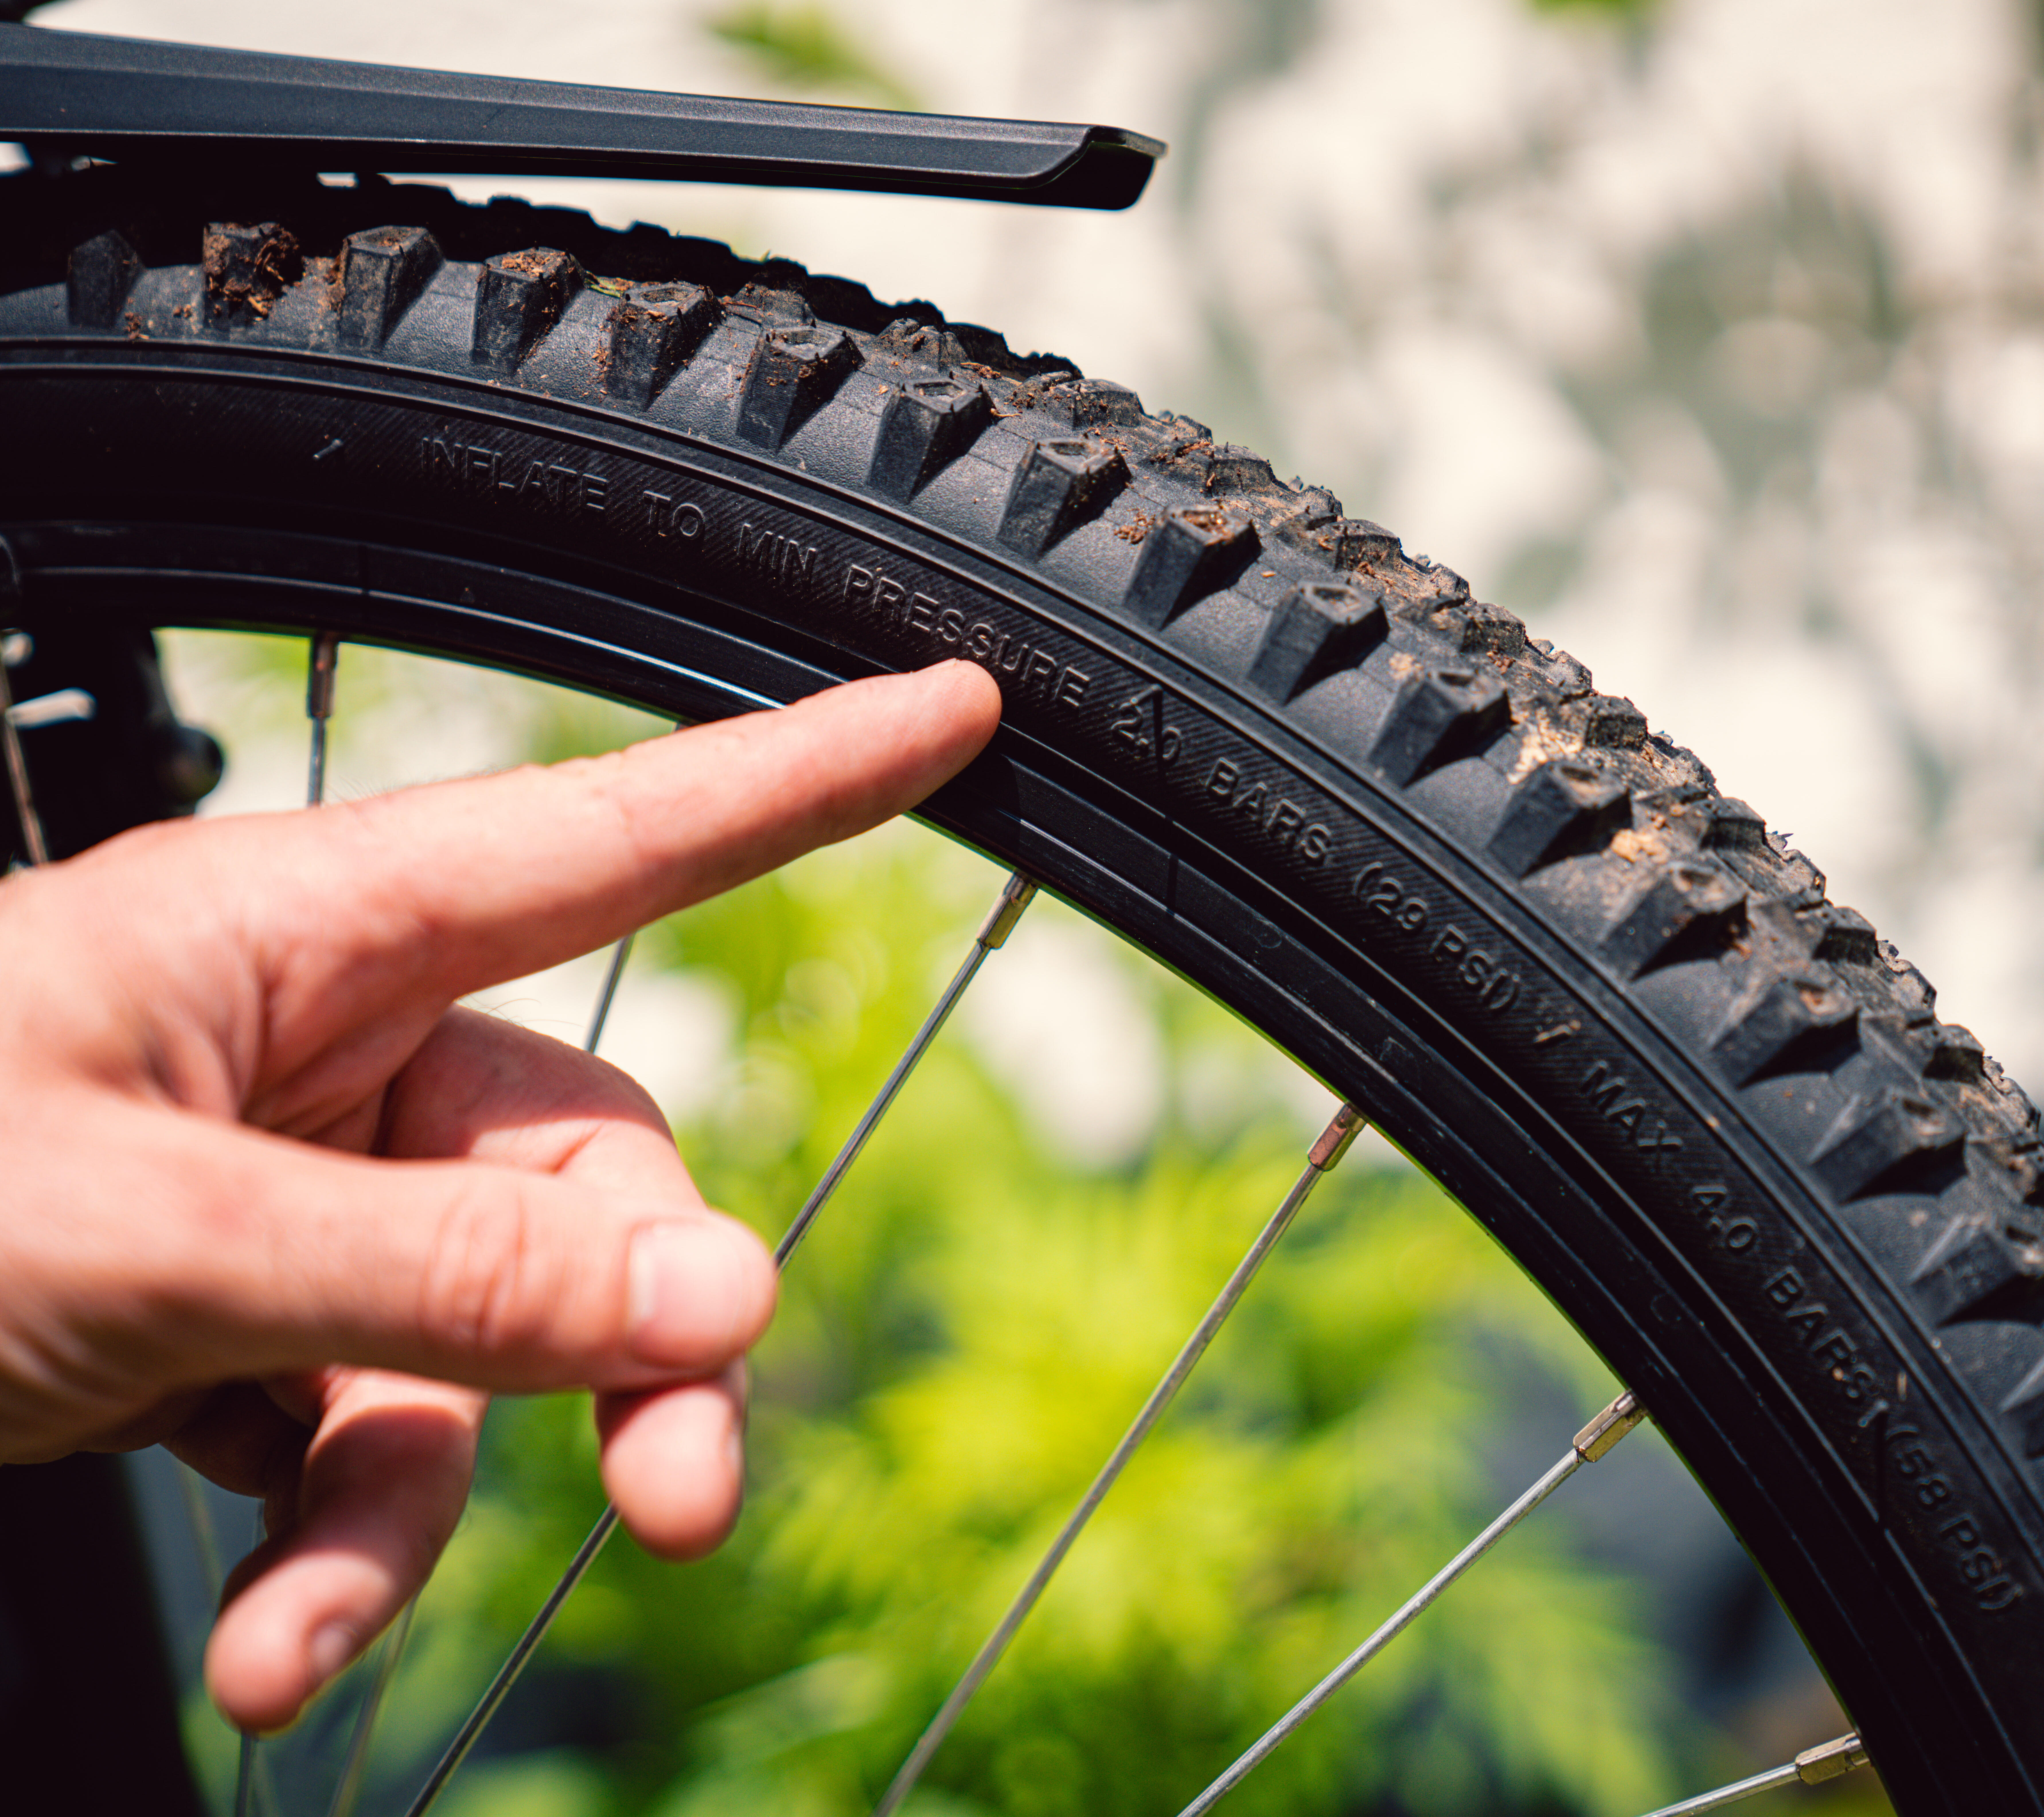 WHAT IS THE RECOMMENDED PRESSURE FOR 20&quot; HYBRID BIKE TYRES?